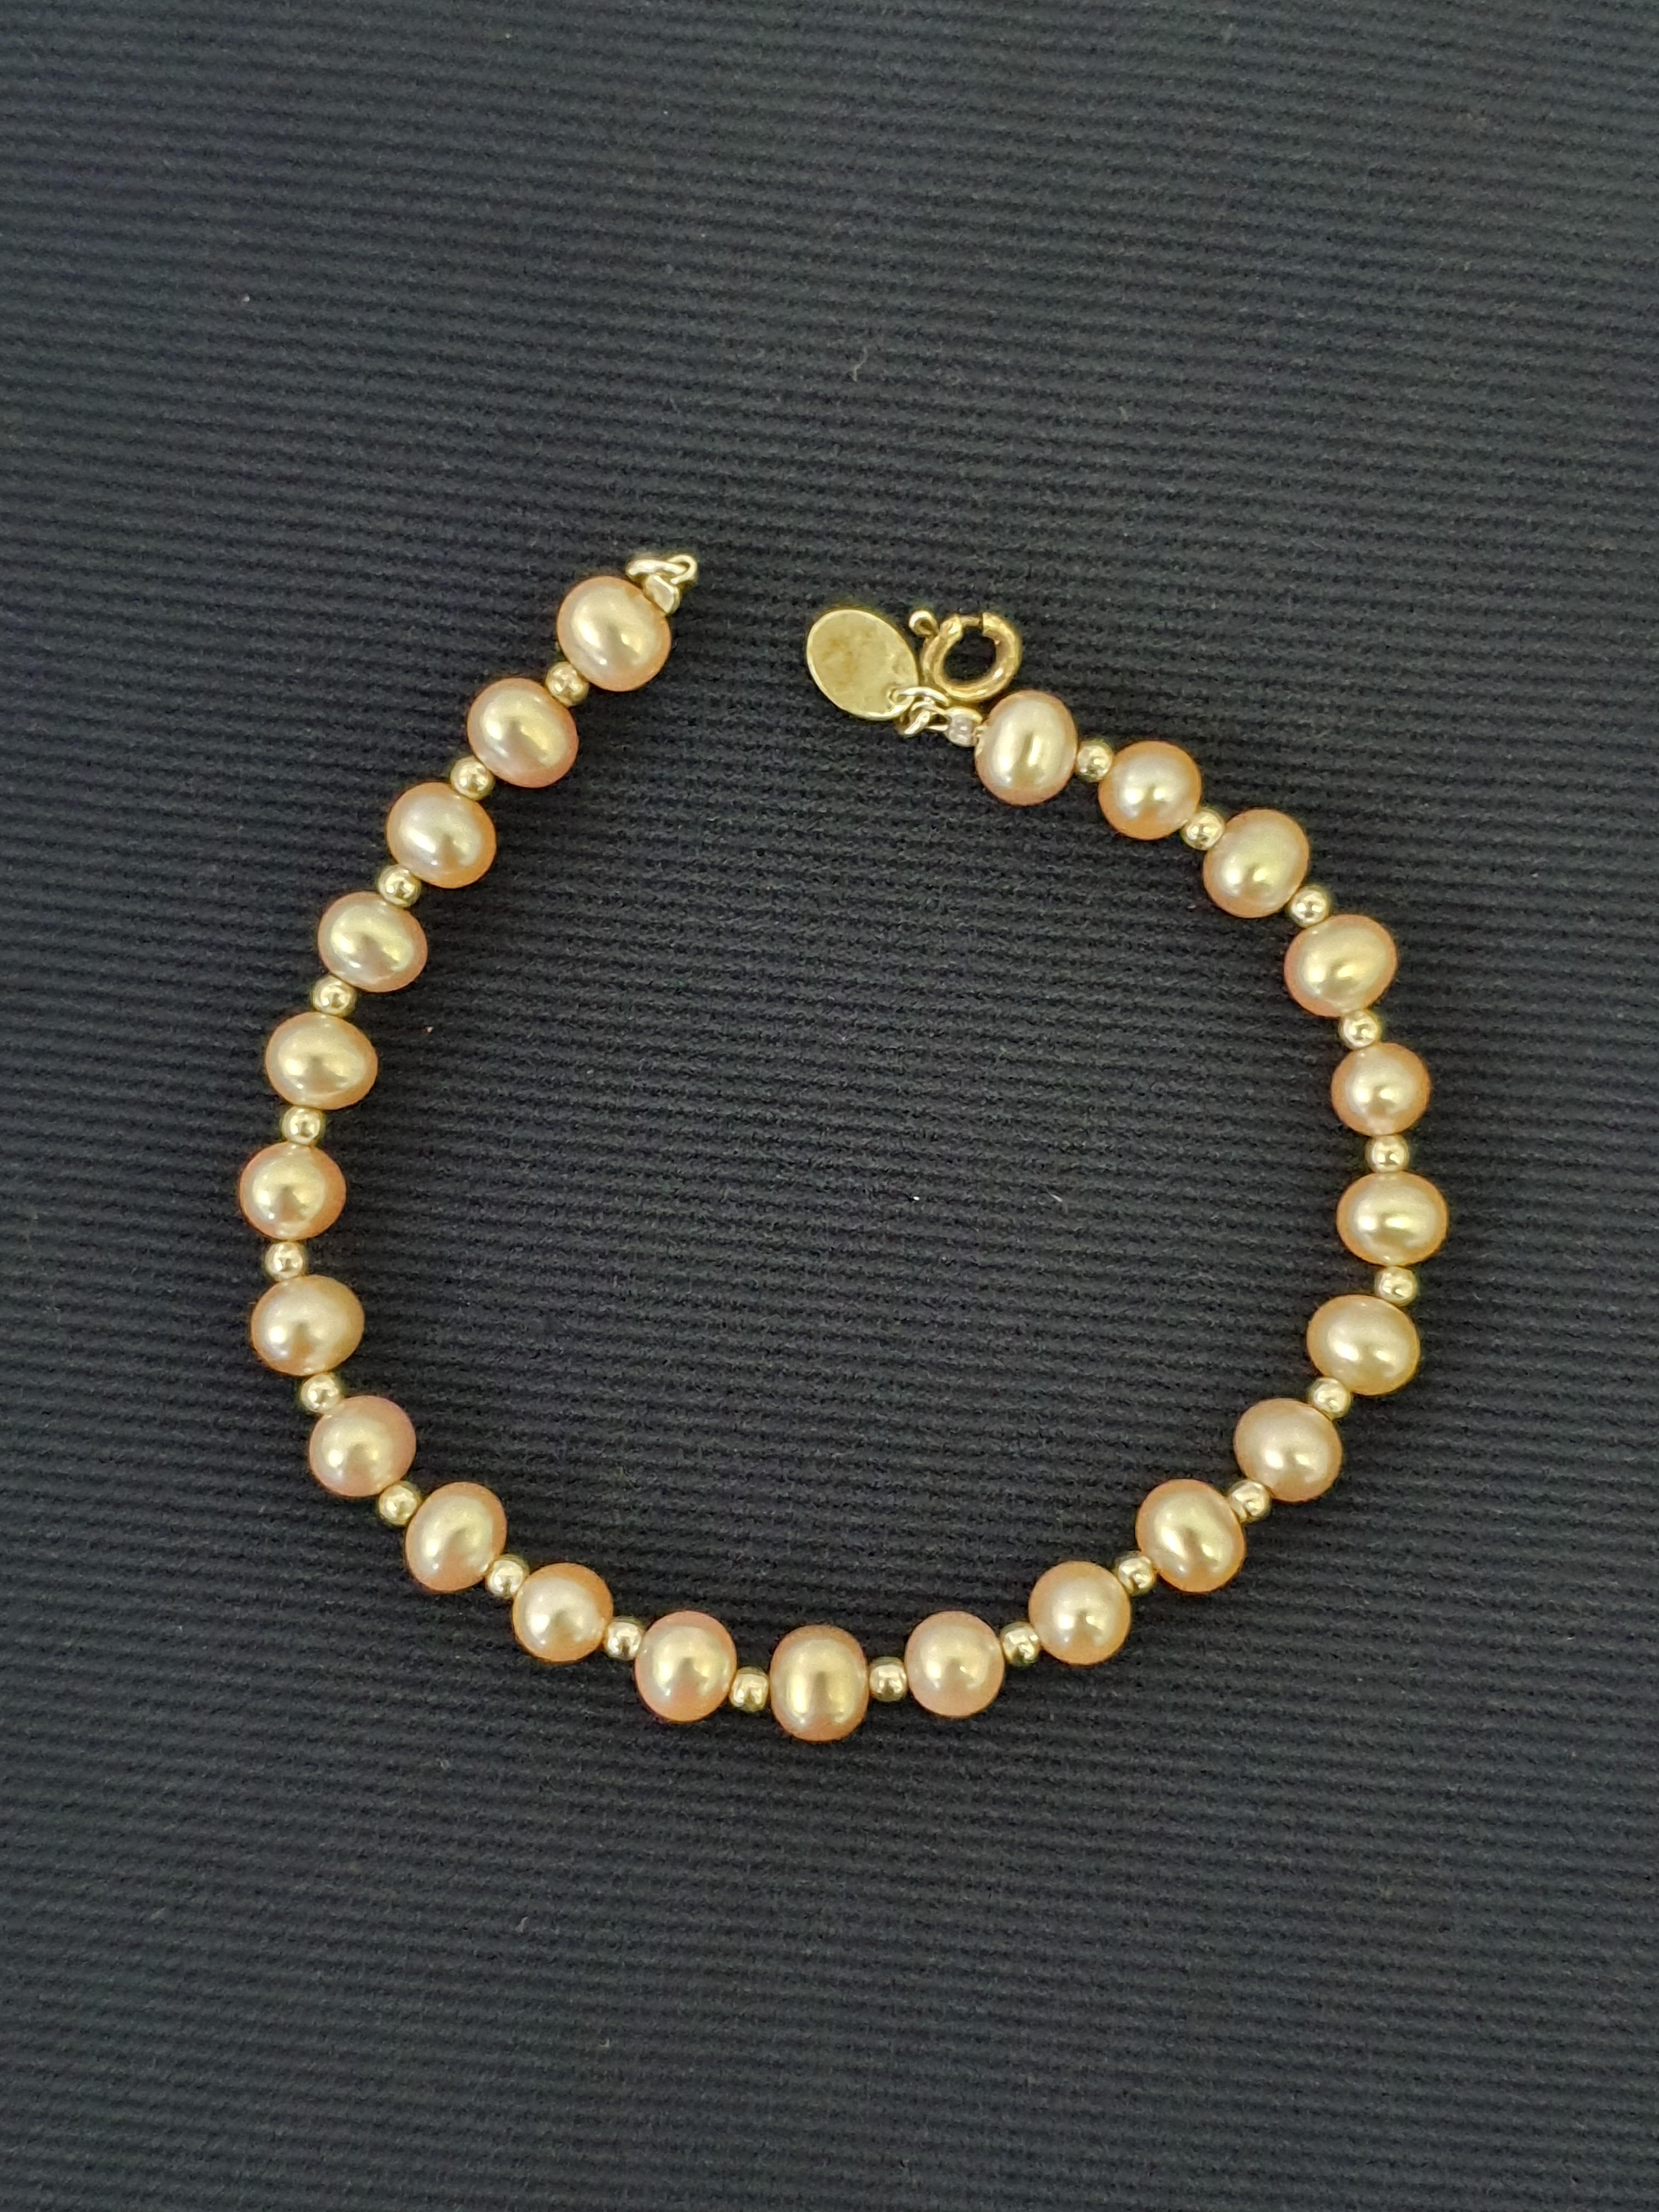 A pinkish purple cultured pearl bracelet with silver-tone spacers, stamped 925. IMPORTANT: Bidding